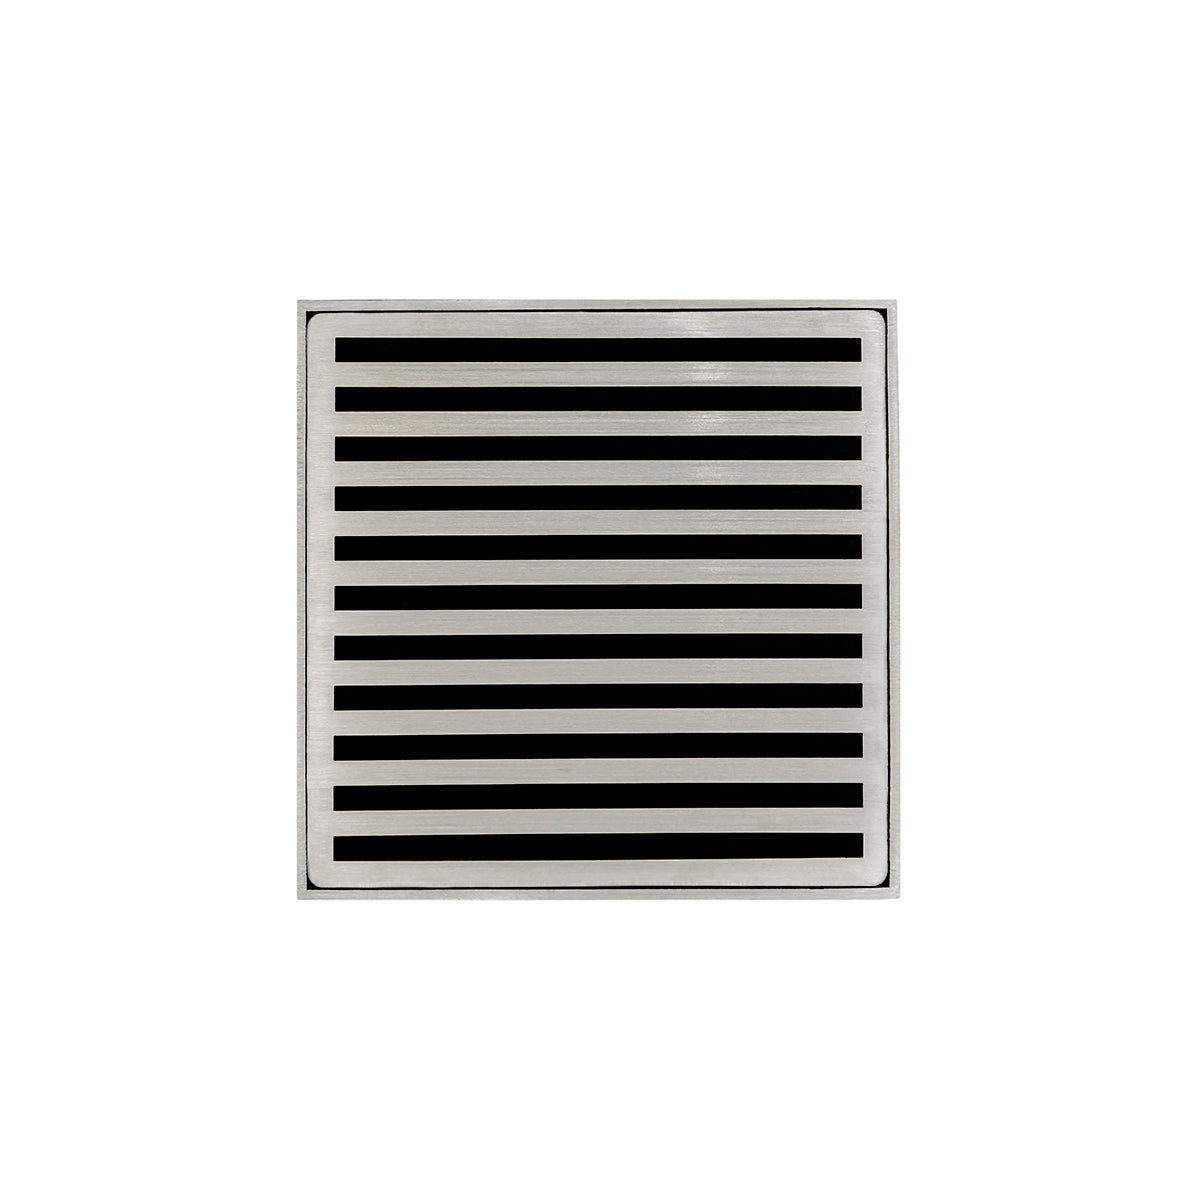 Infinity Drain 5" x 5" Strainer Premium Center Drain Kit with Lines Pattern Decorative Plate and 2" Throat for ND 5